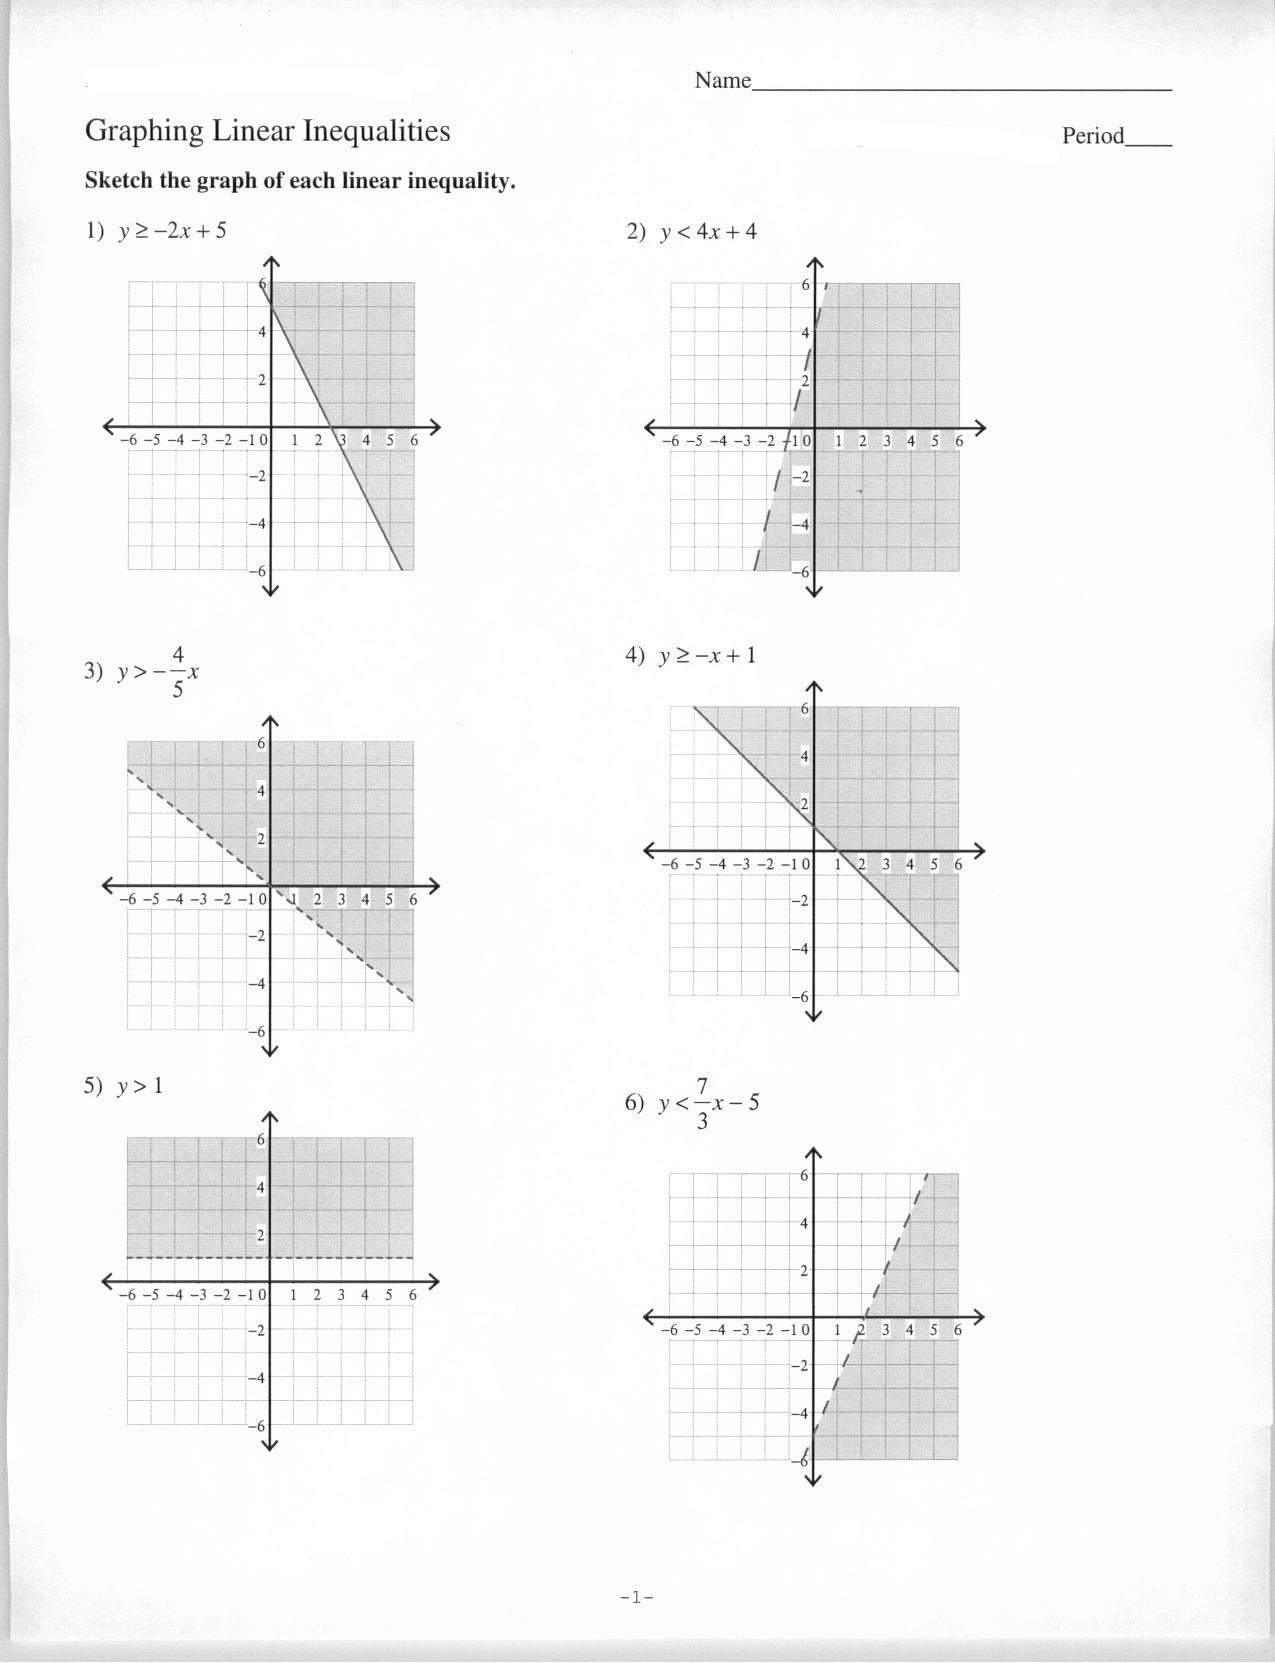 New Solving Linear Inequalities Kuta For Solving Systems Of Linear Inequalities Worksheet Answers